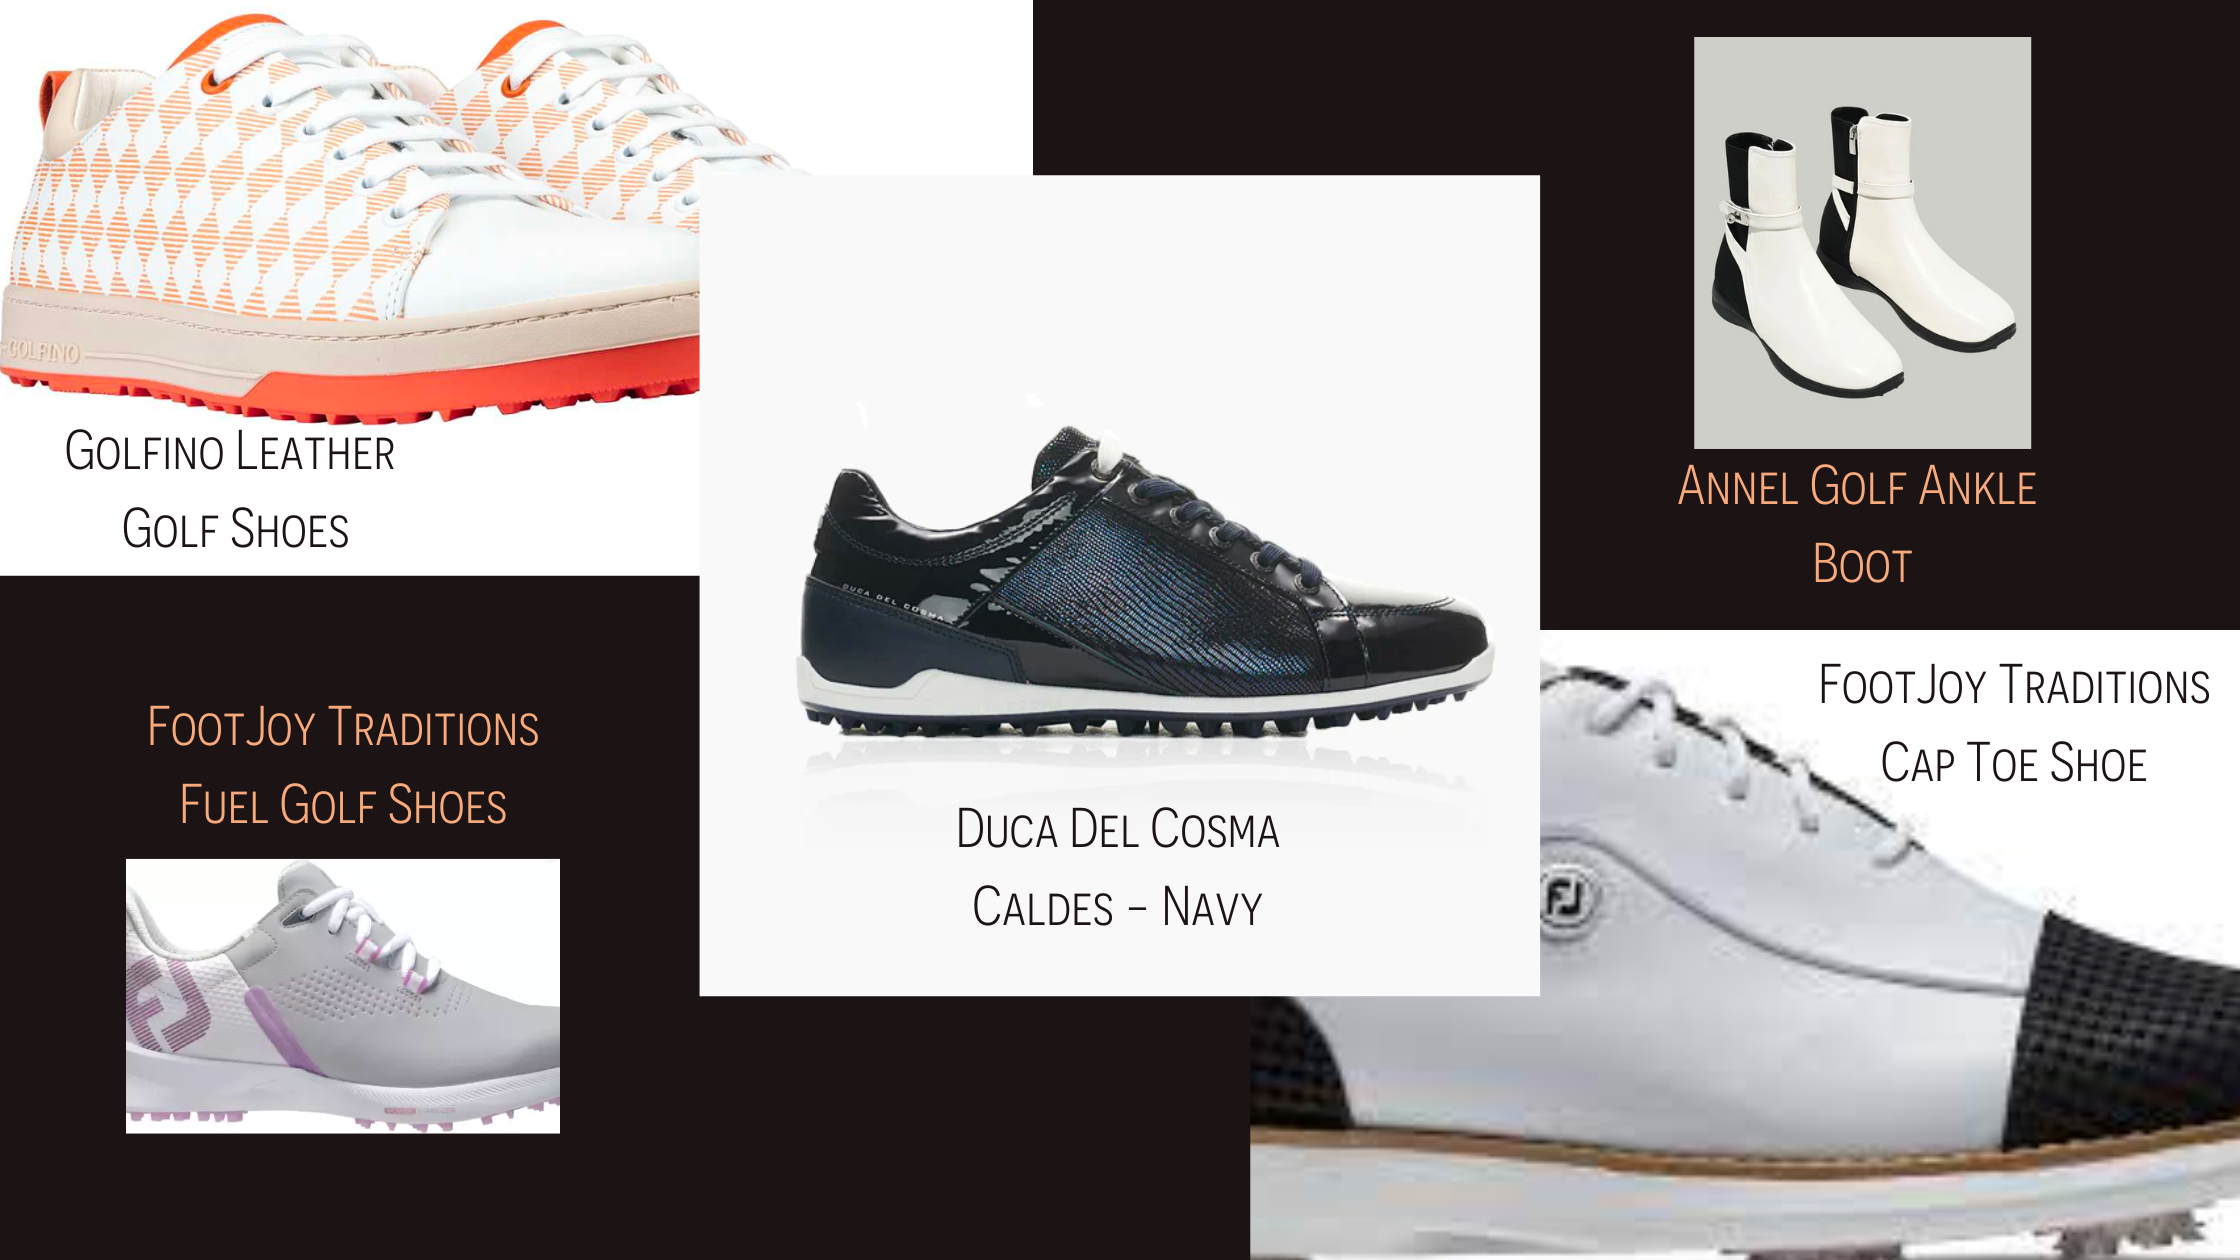 5 Pairs of non traditional golf shoes meant for style, to help enhance women's golf accessories via footwear. A pair of boots, white sneakers, and various other looks.